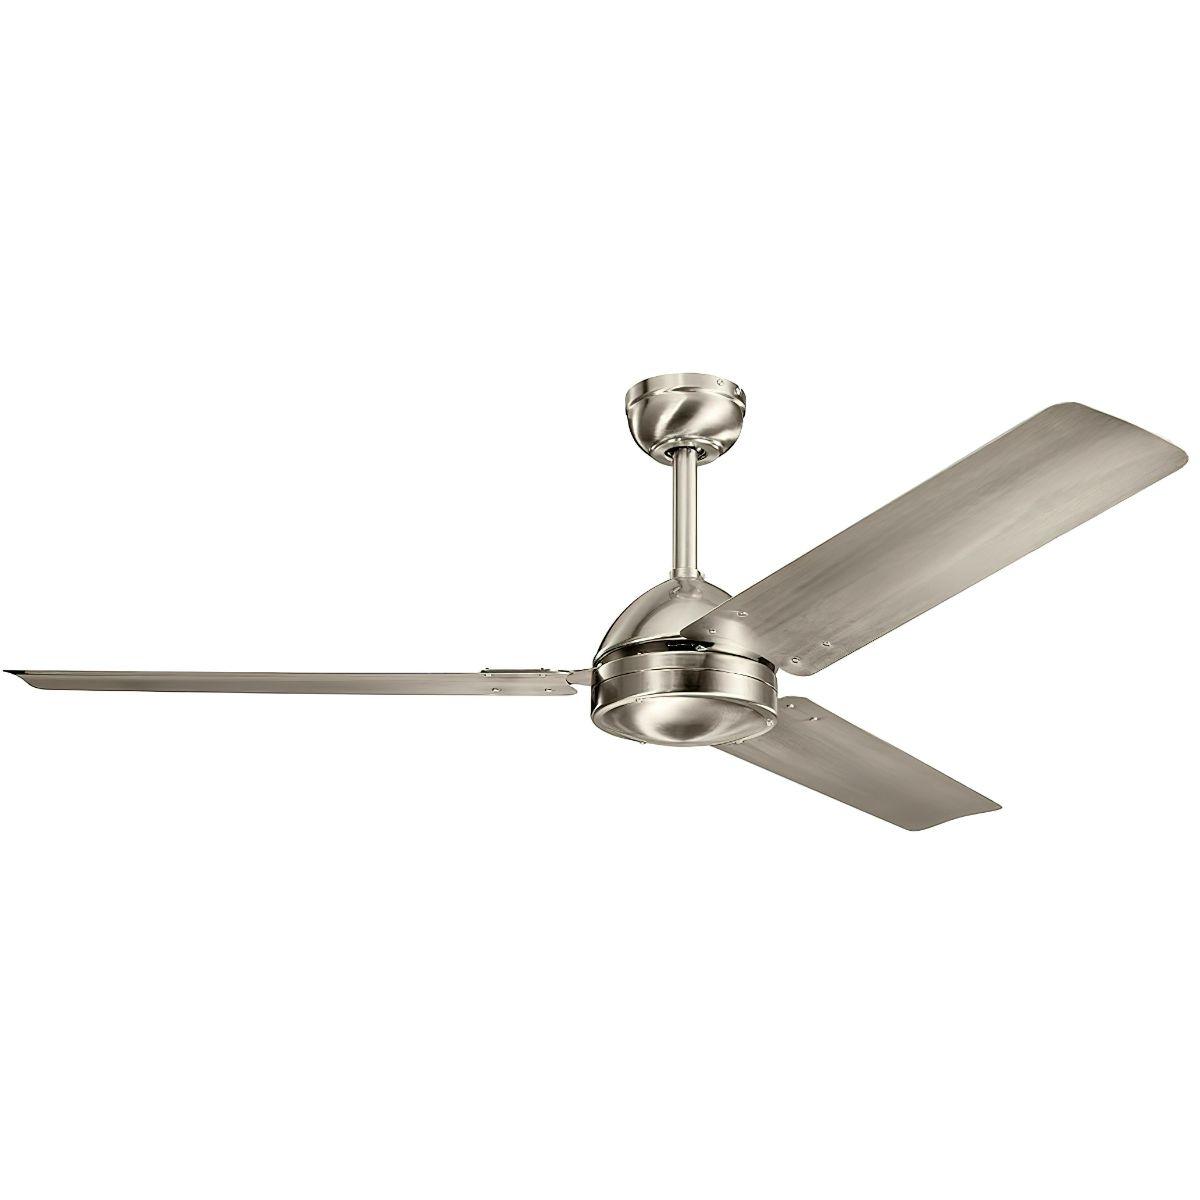 Todo 56 Inch Ceiling Fan With Wall Control